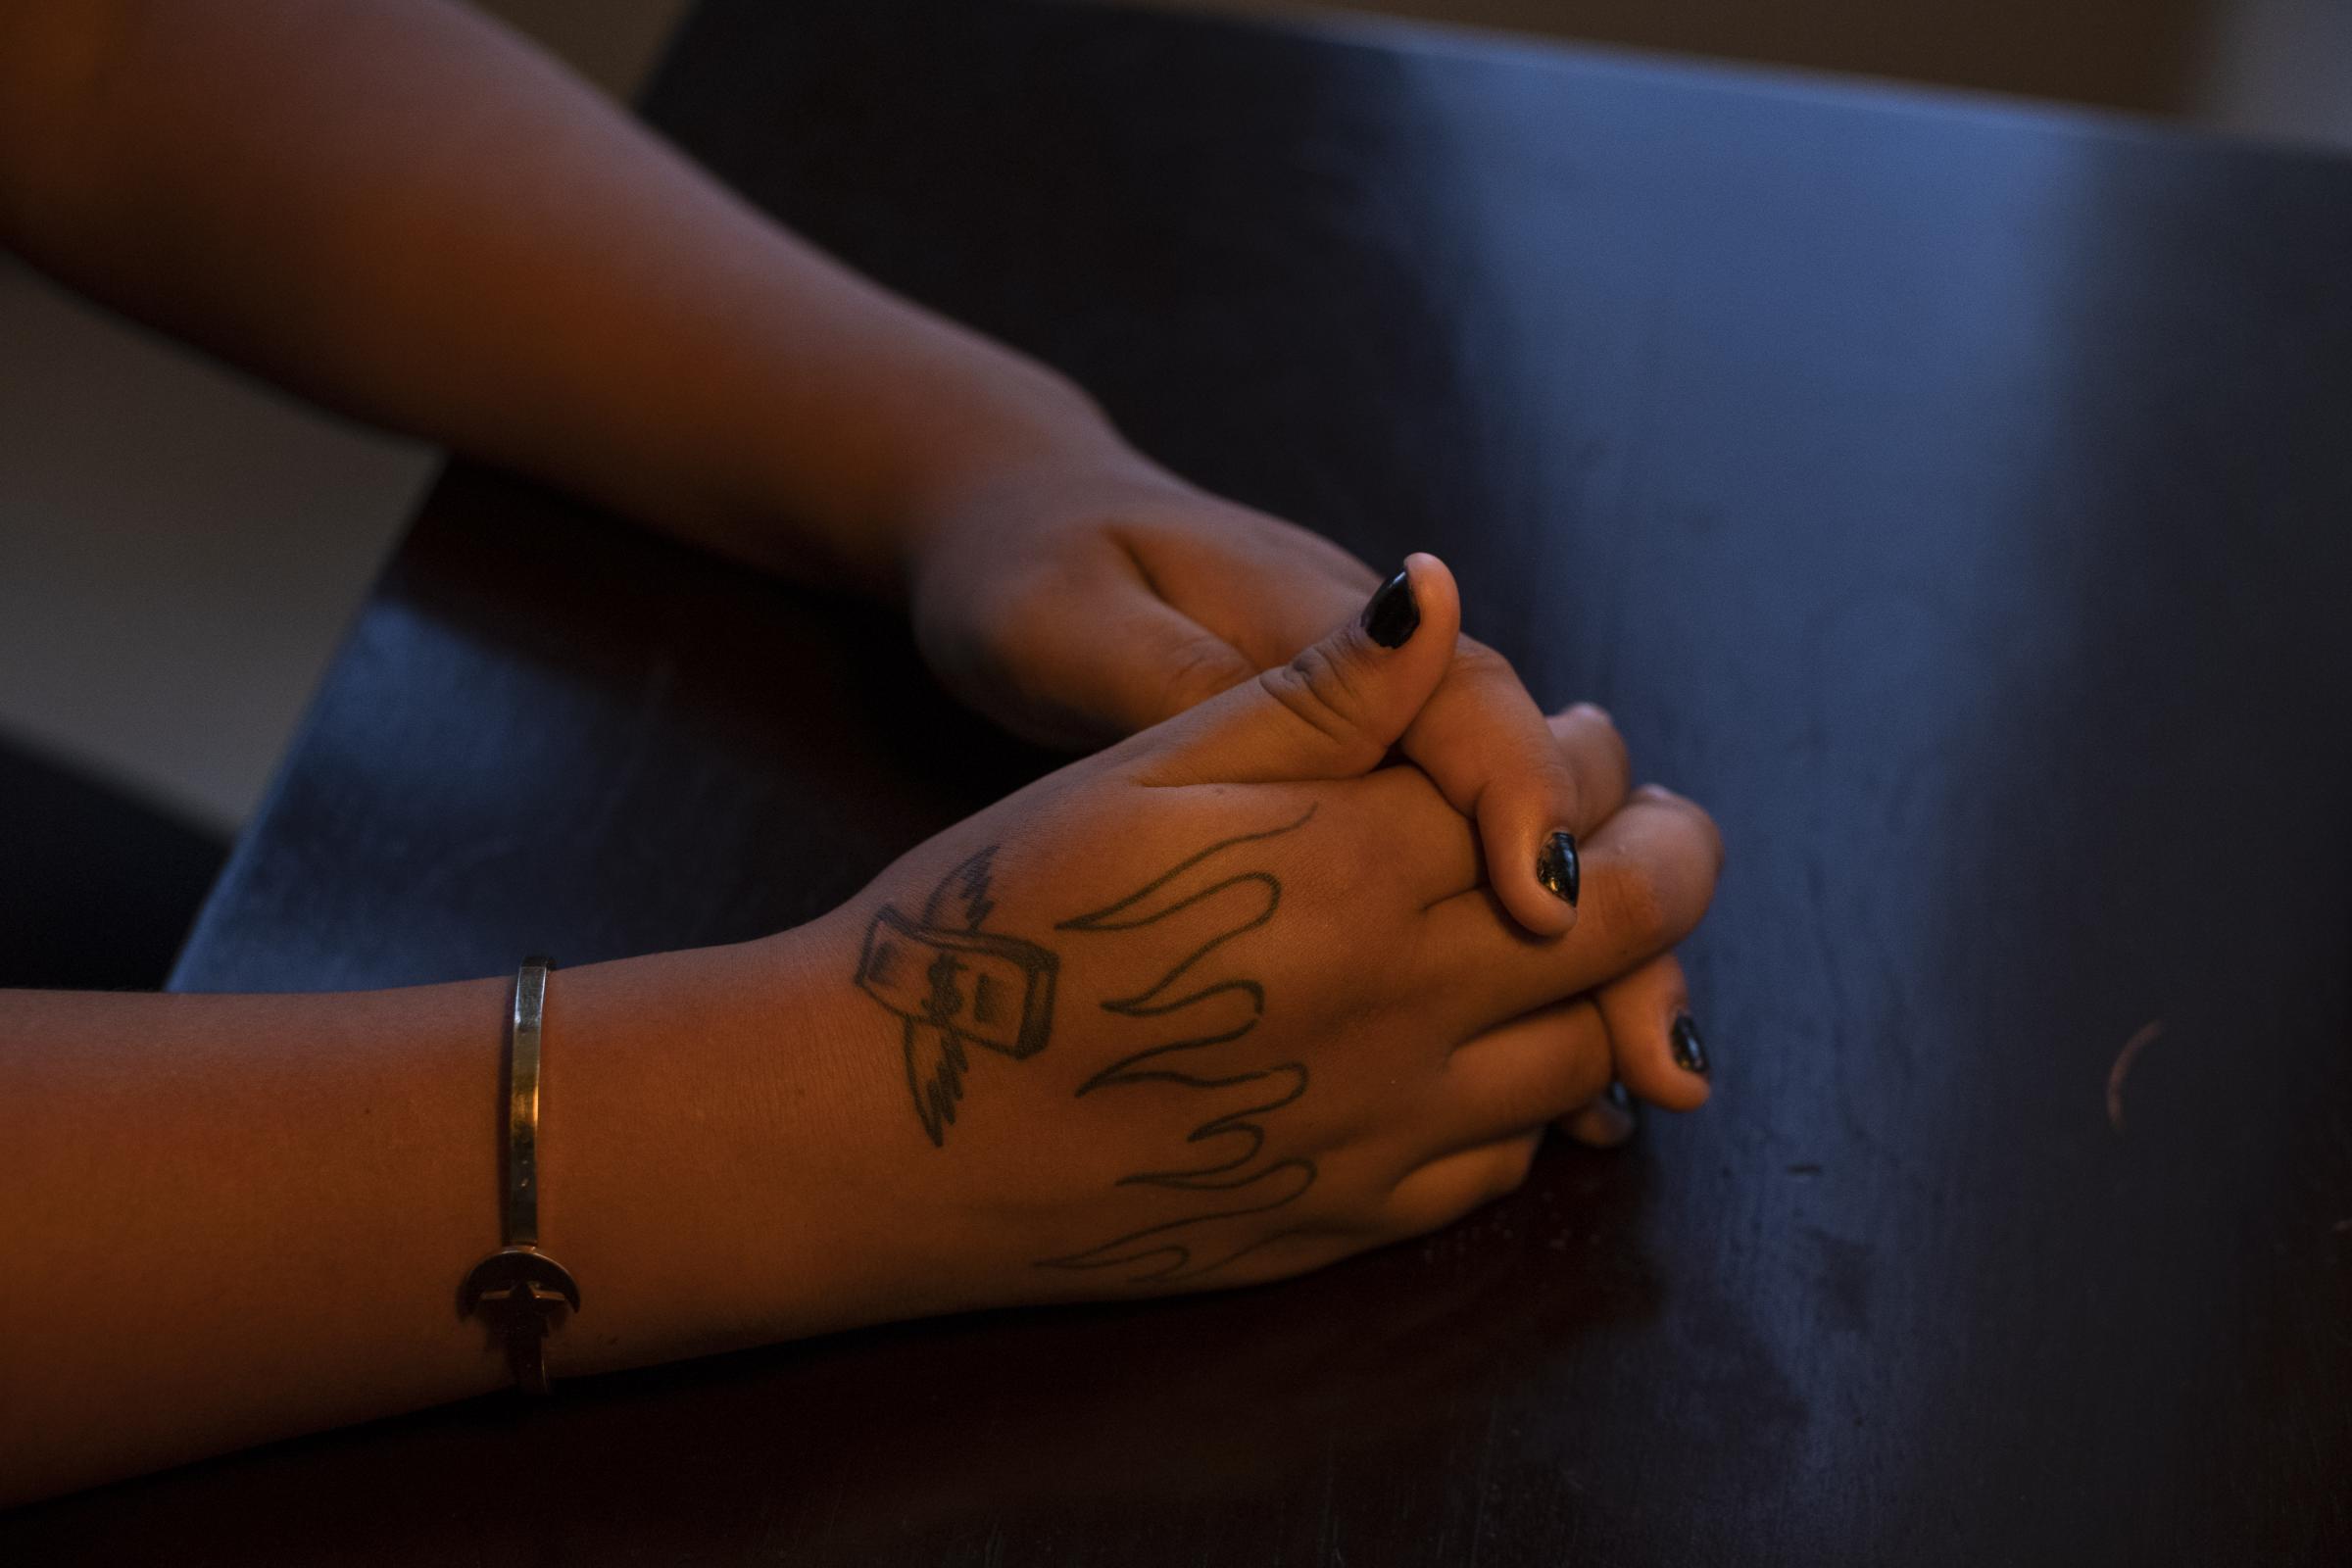 Paradise lost: Inside Peru's emergency zone for NBC News - Detail of the tattoos on Celine&#39;s hand, a victim of trafficking and forced prostitution...